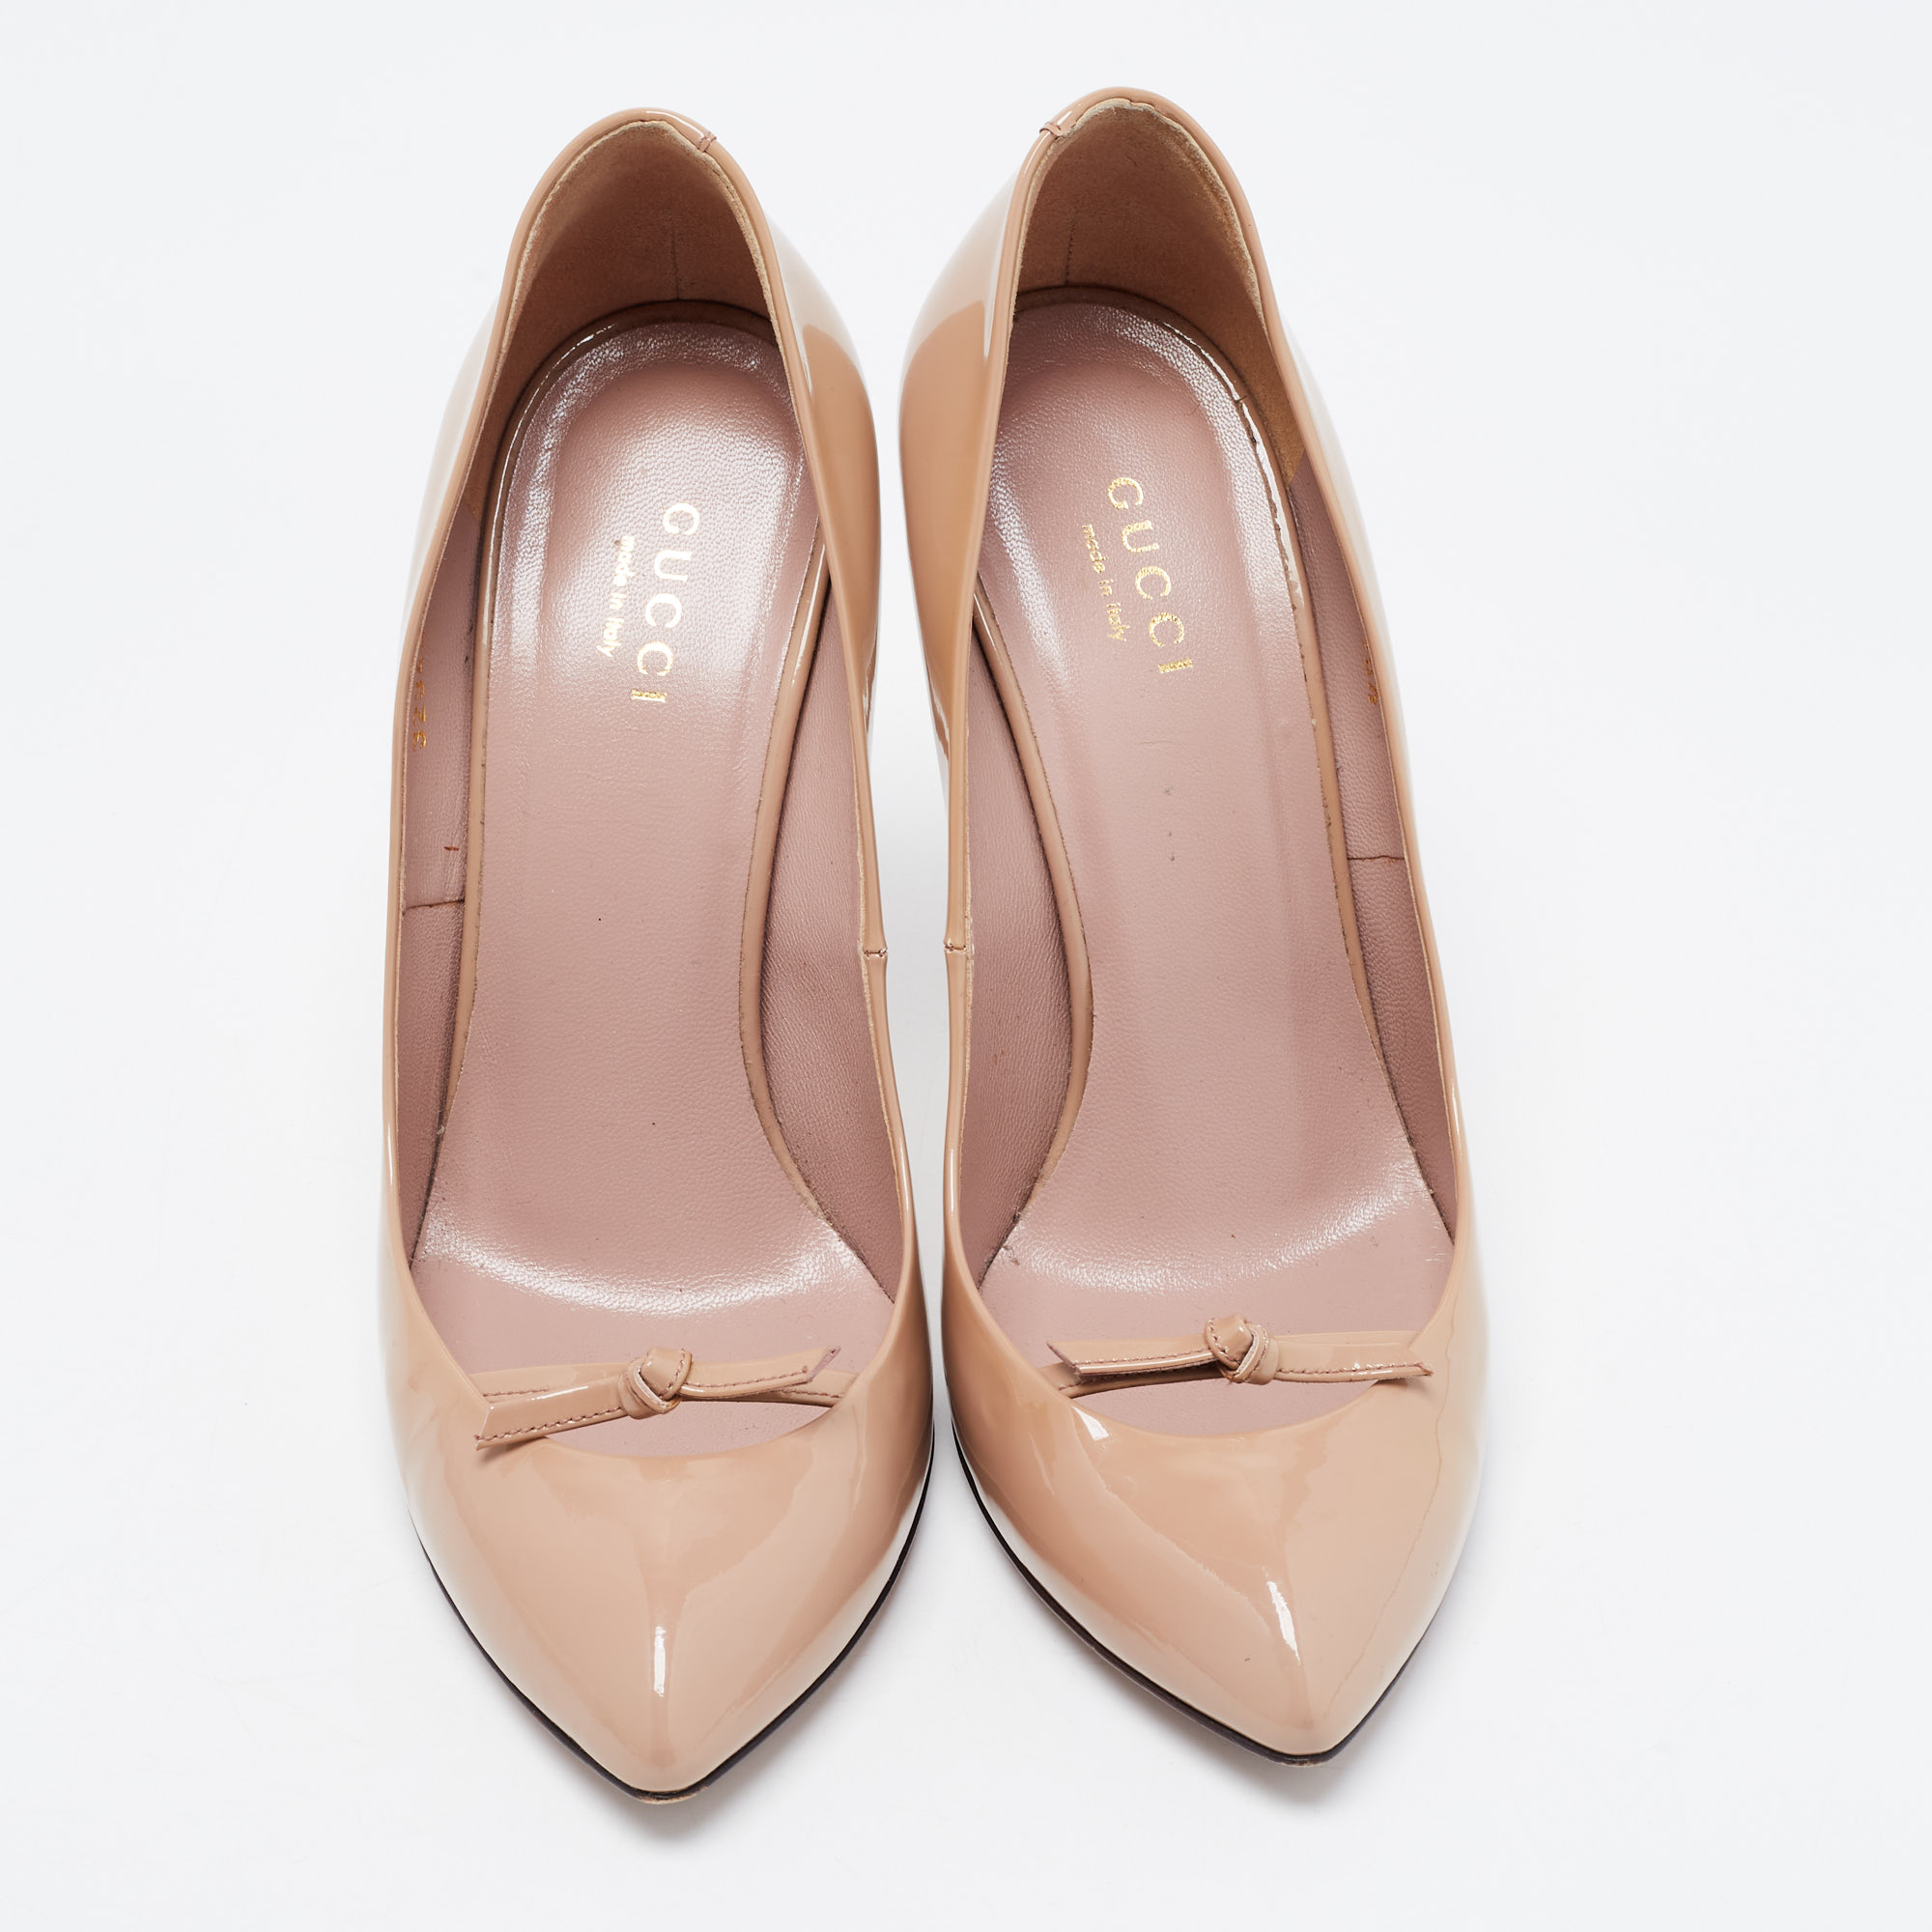 Gucci Beige Patent Leather Beverly Pumps Size 36.5